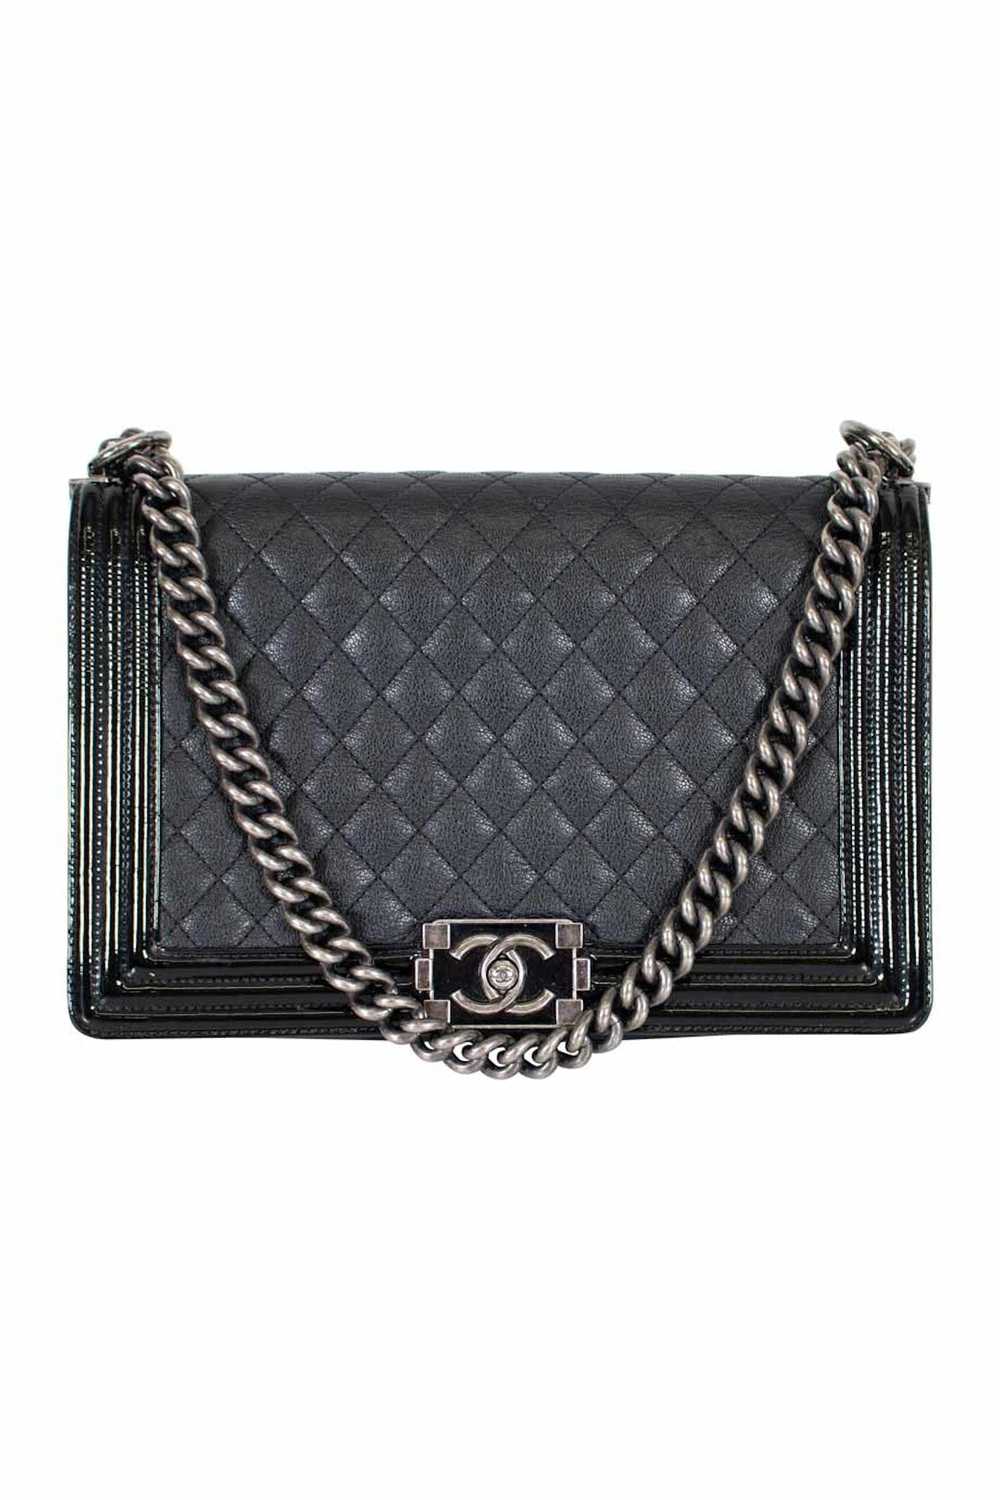 Chanel CHANEL Black grained calfskin quilted 'Boy… - image 3